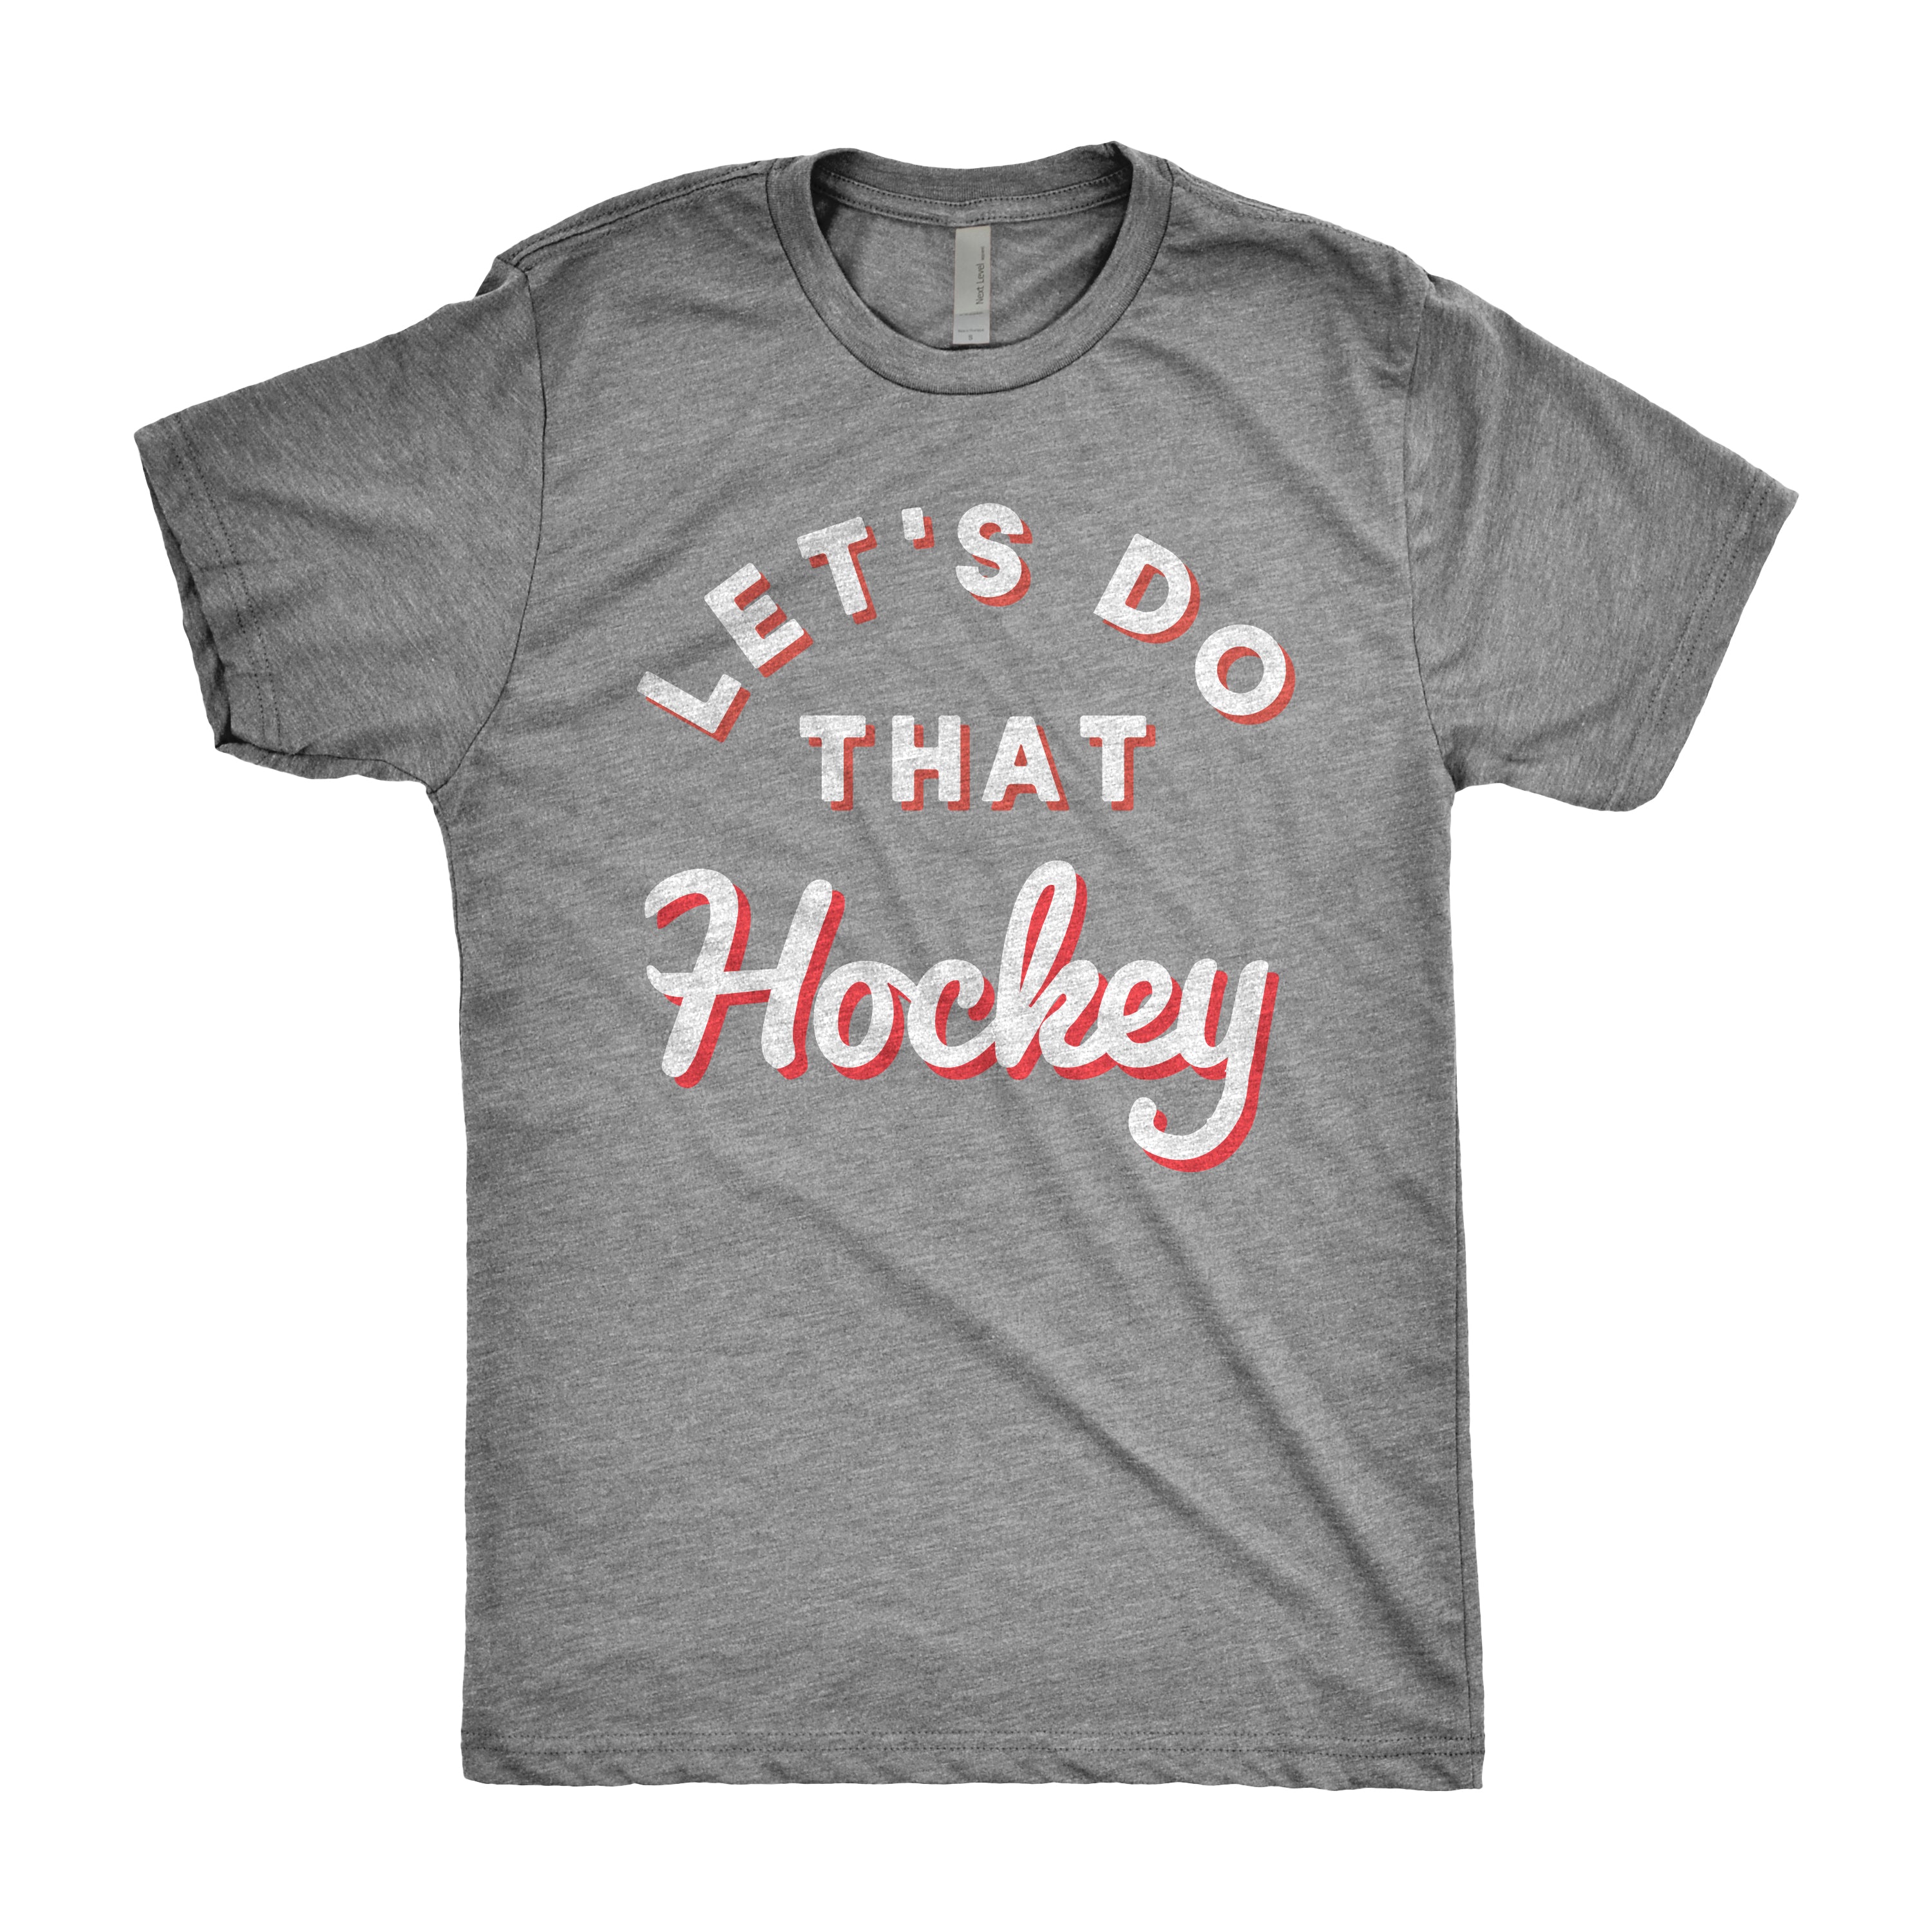 Let's Do That Hockey Shirt